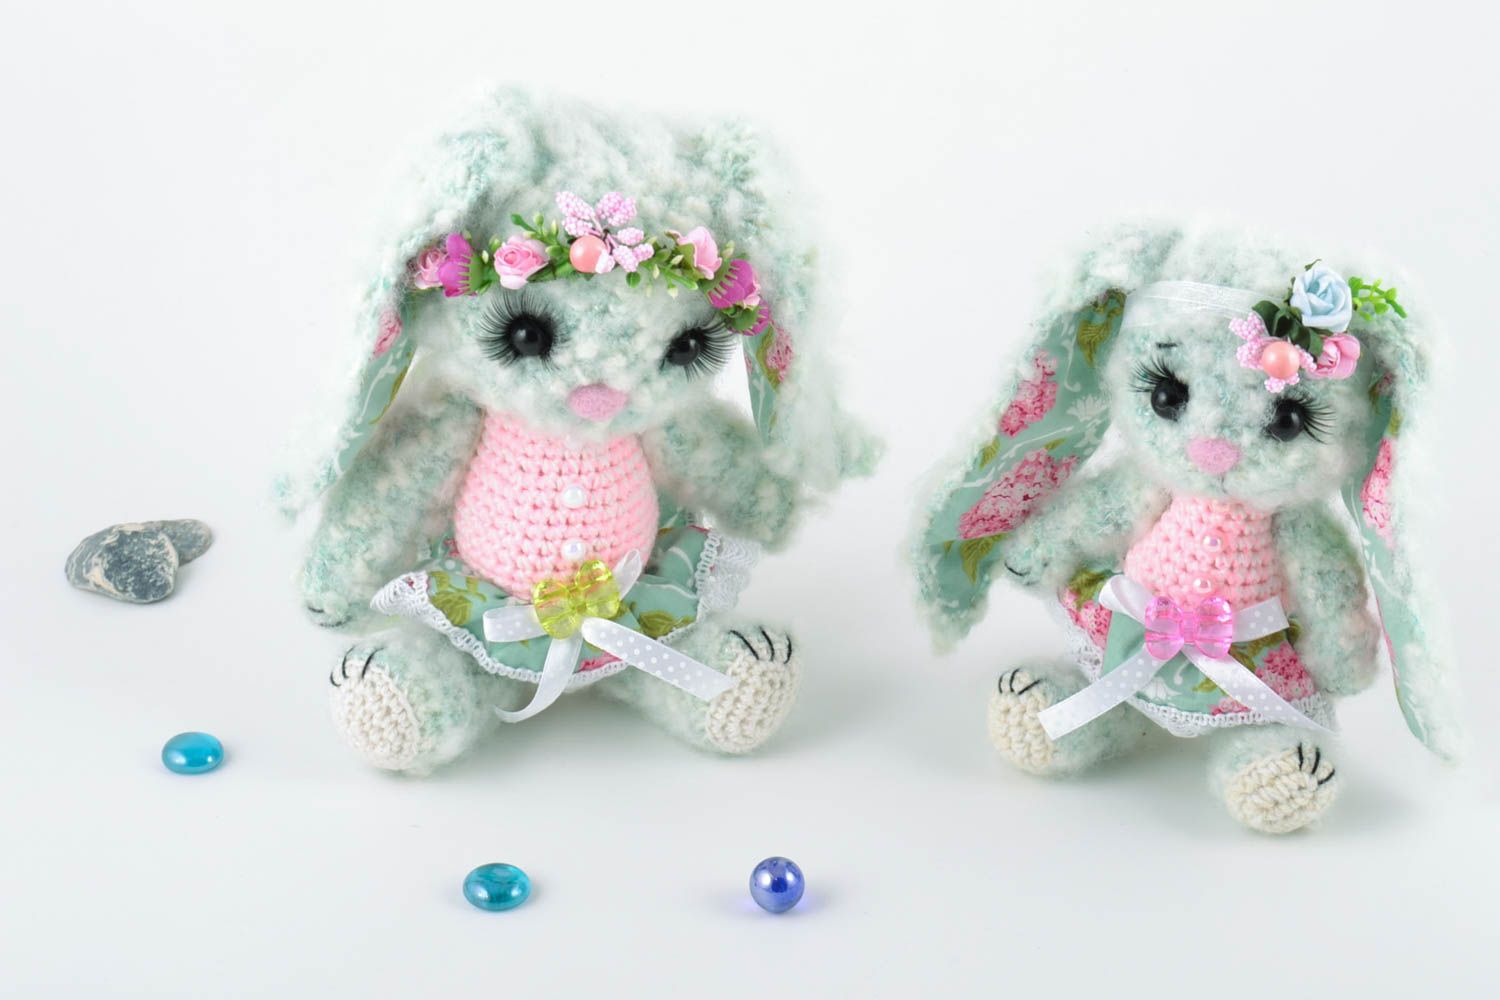 Soft handmade crocheted toy with woolen elements set of 2 toys Bunnies  photo 1